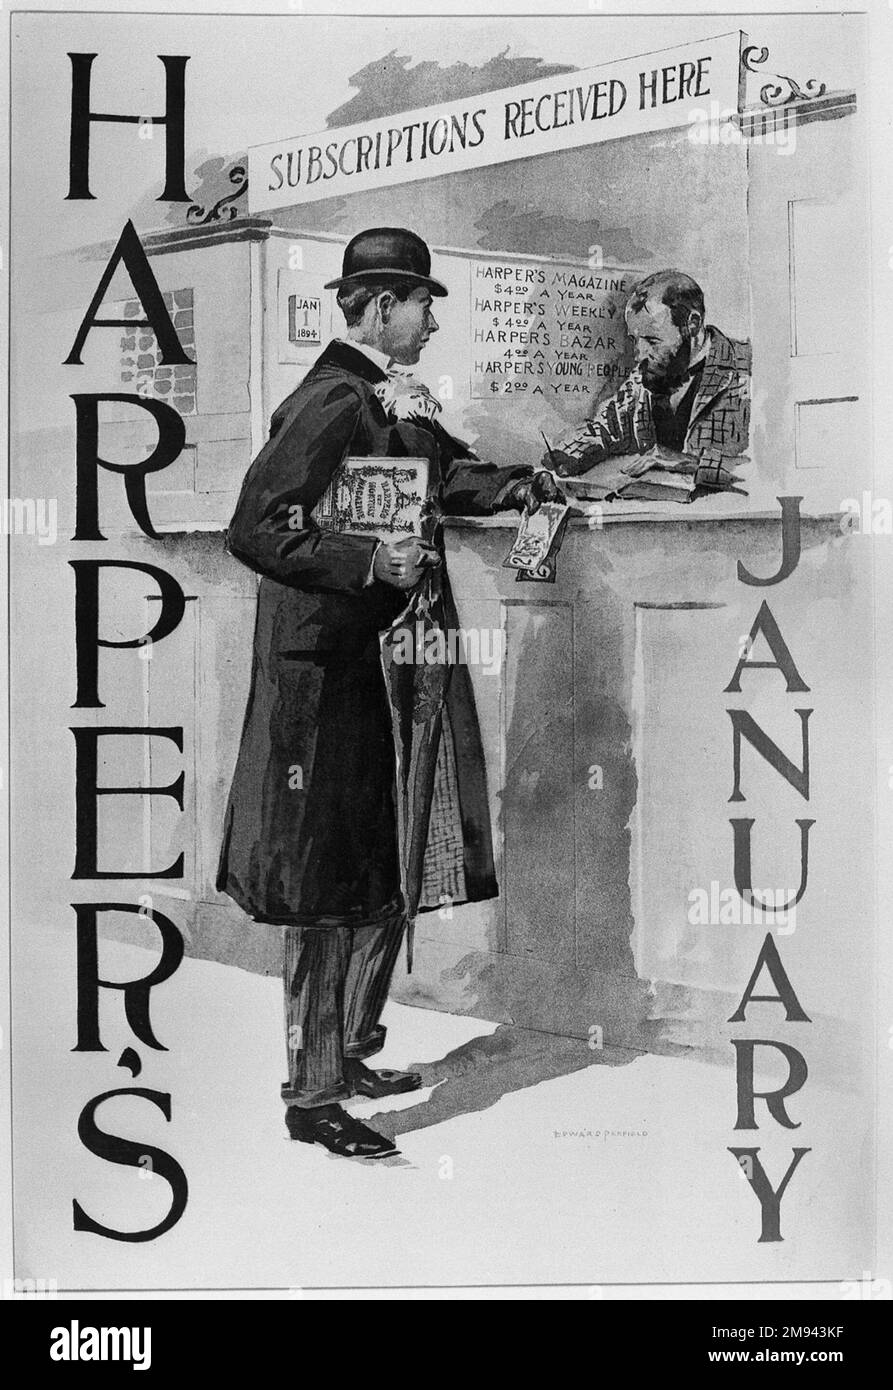 Harper's Poster - January 1894 Edward Penfield (American, 1866-1925). , 1894. Lithograph on wove paper, Sheet: 18 1/2 x 120 1/2 in. (47 x 306 cm).   American Art 1894 Stock Photo